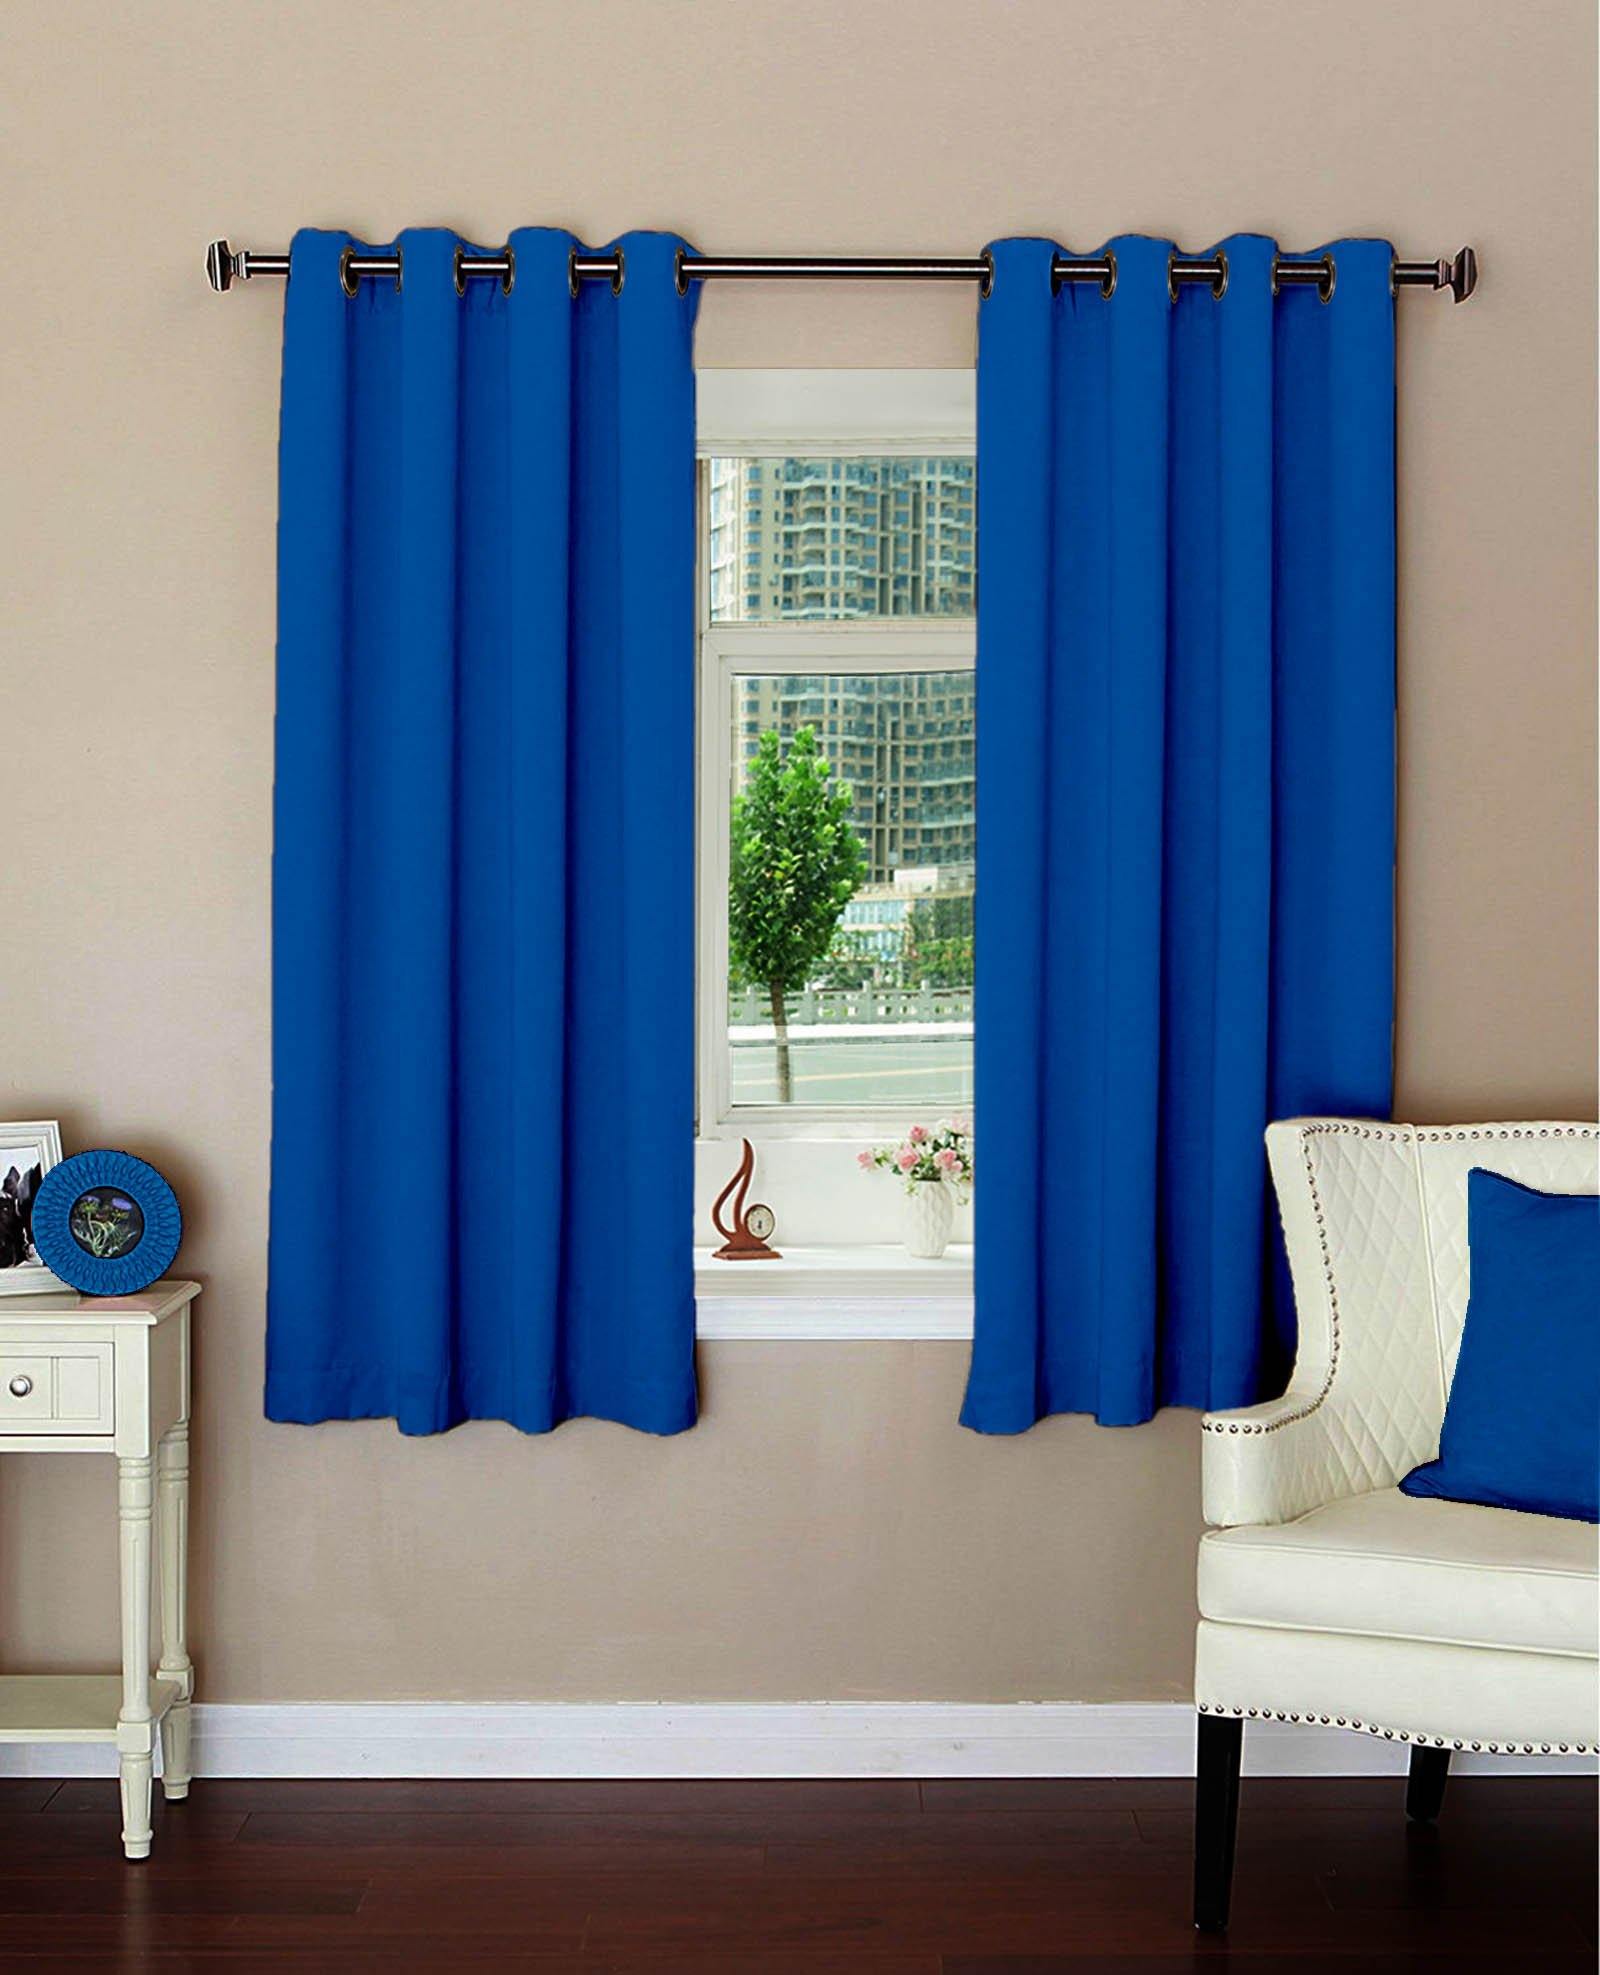 Lushomes Plain Fire Blue Polyester Blackout Curtains with 8 Metal Eyelets for Windows (Size: 54"x60", Single pc) - Lushomes